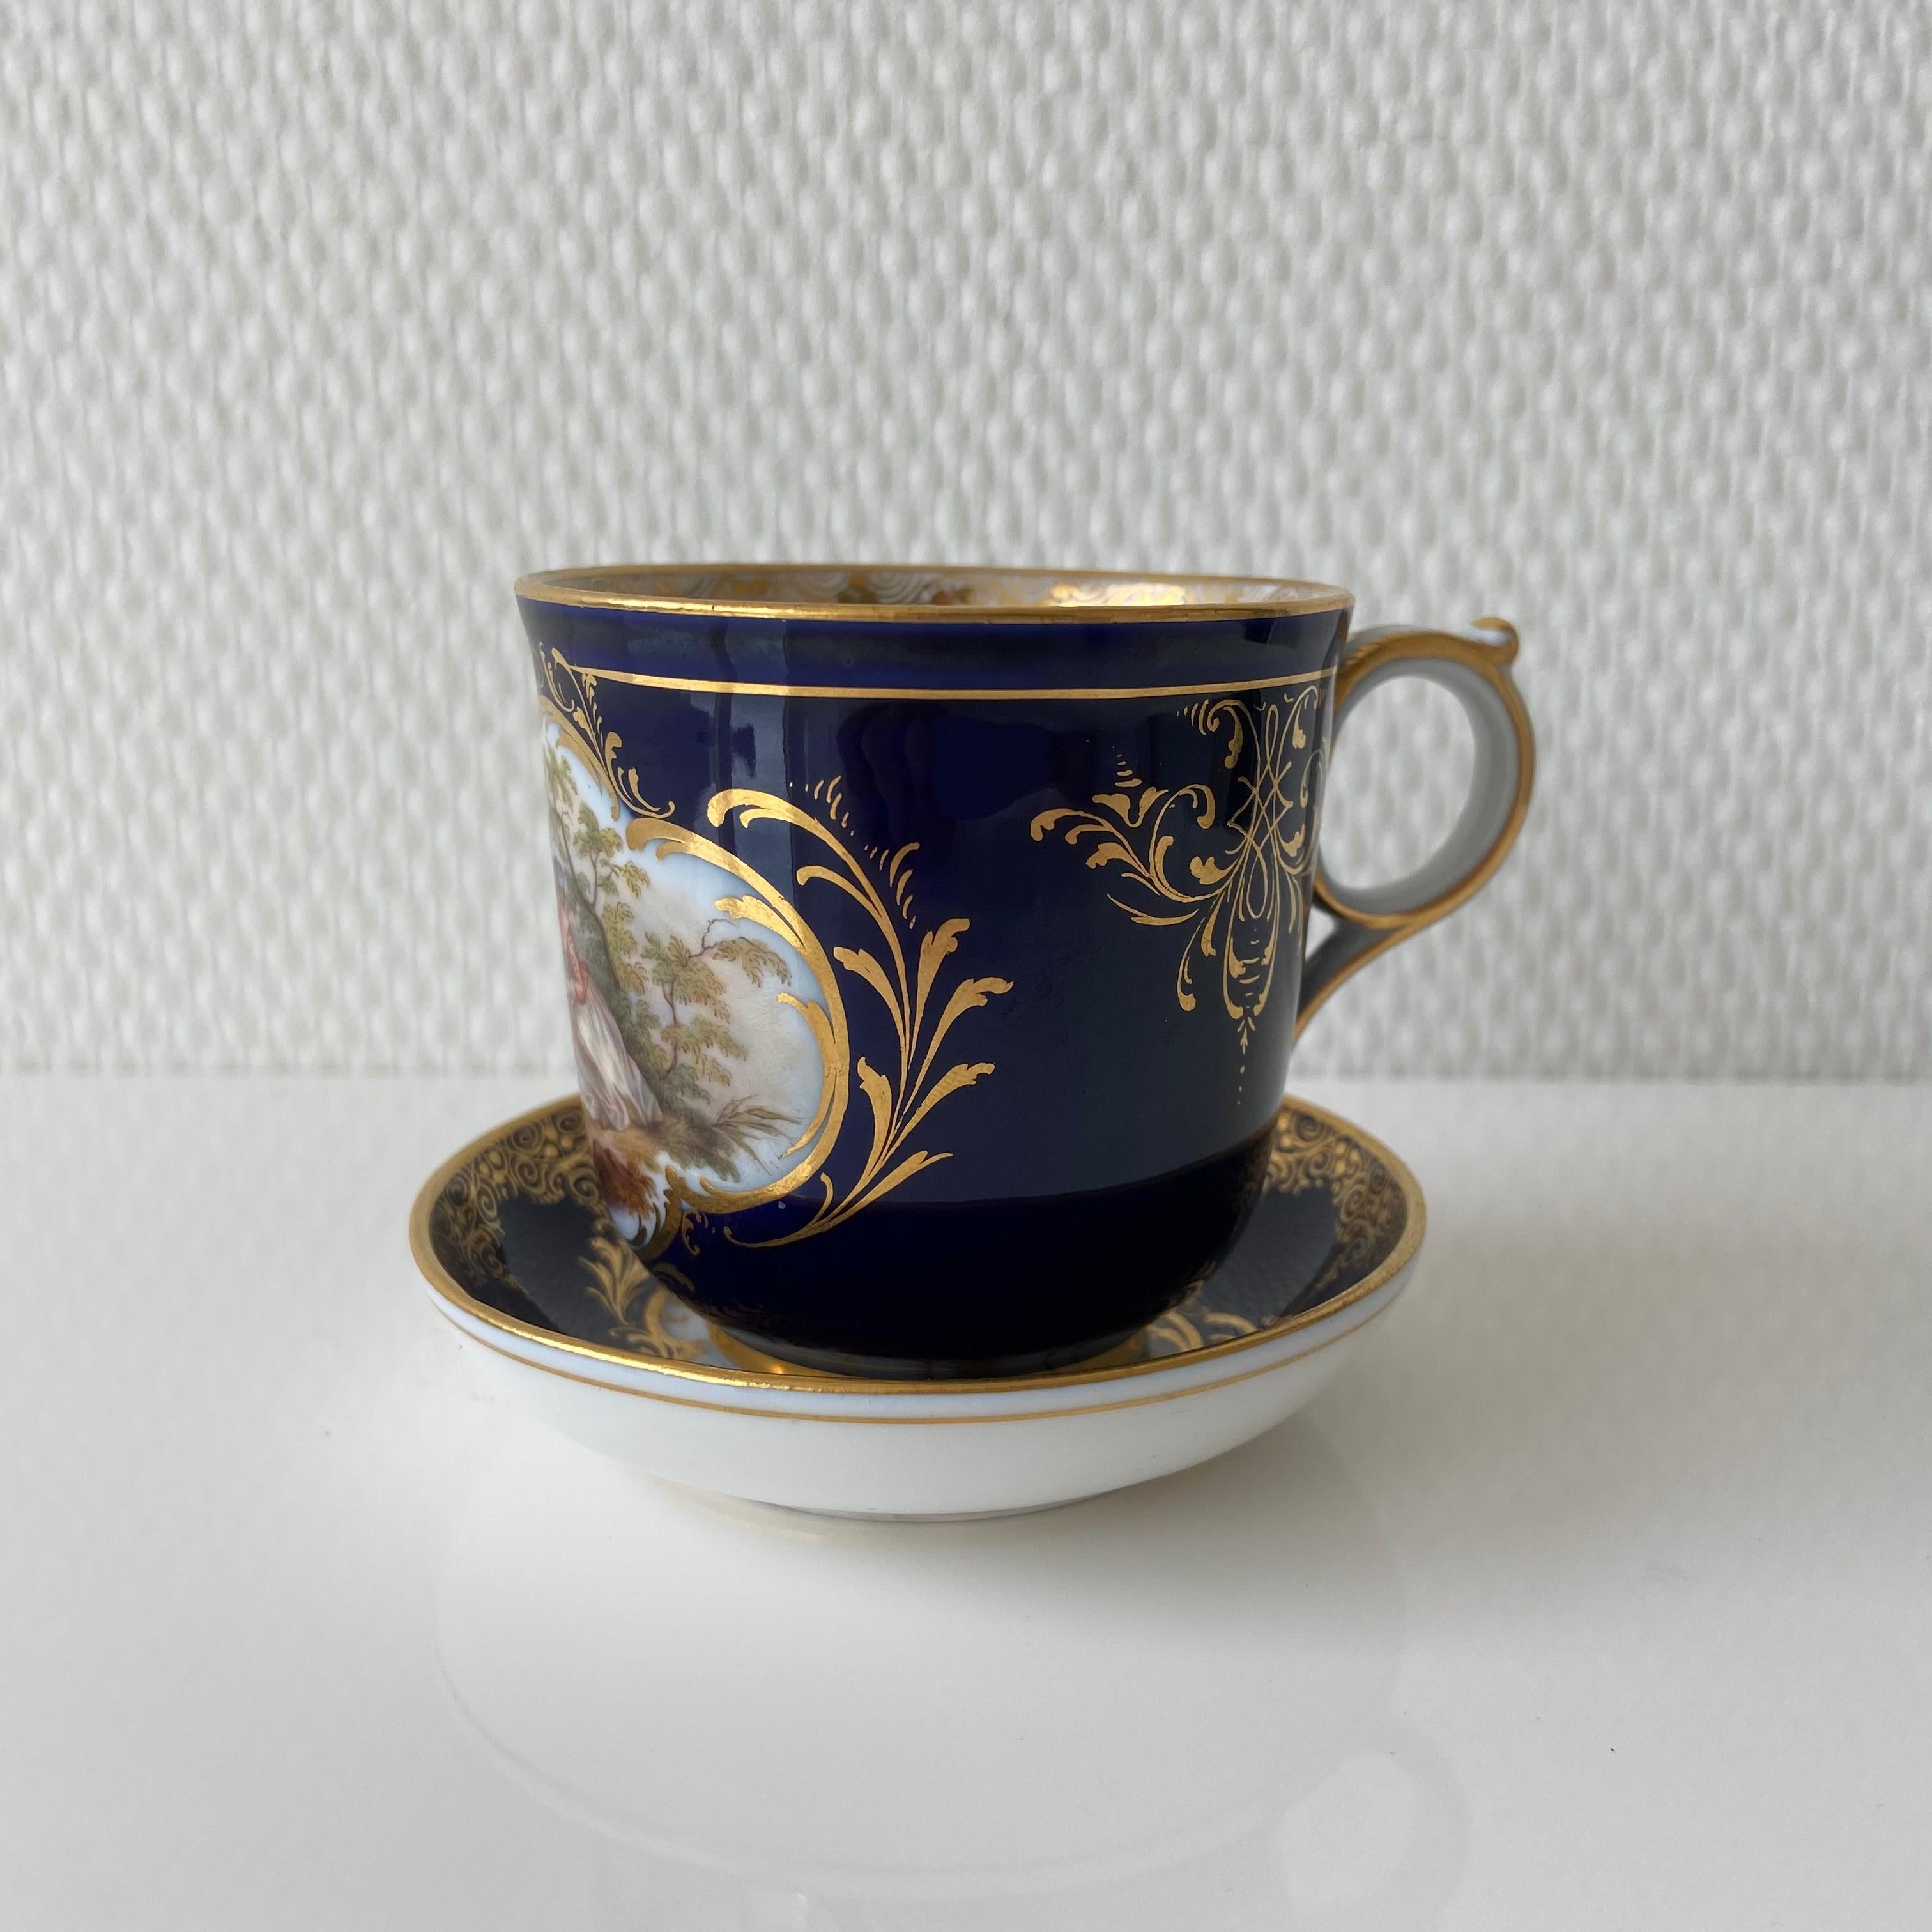 Mid-19th century Meissen cobalt blue with beautiful scene painting coffee cup saucer

2-part mocha setting from Meissen.
Decor: cobalt blue background with beautiful scene painting.
Dimensions: Saucer diameter approx. 8cm.
Cup diameter approx.